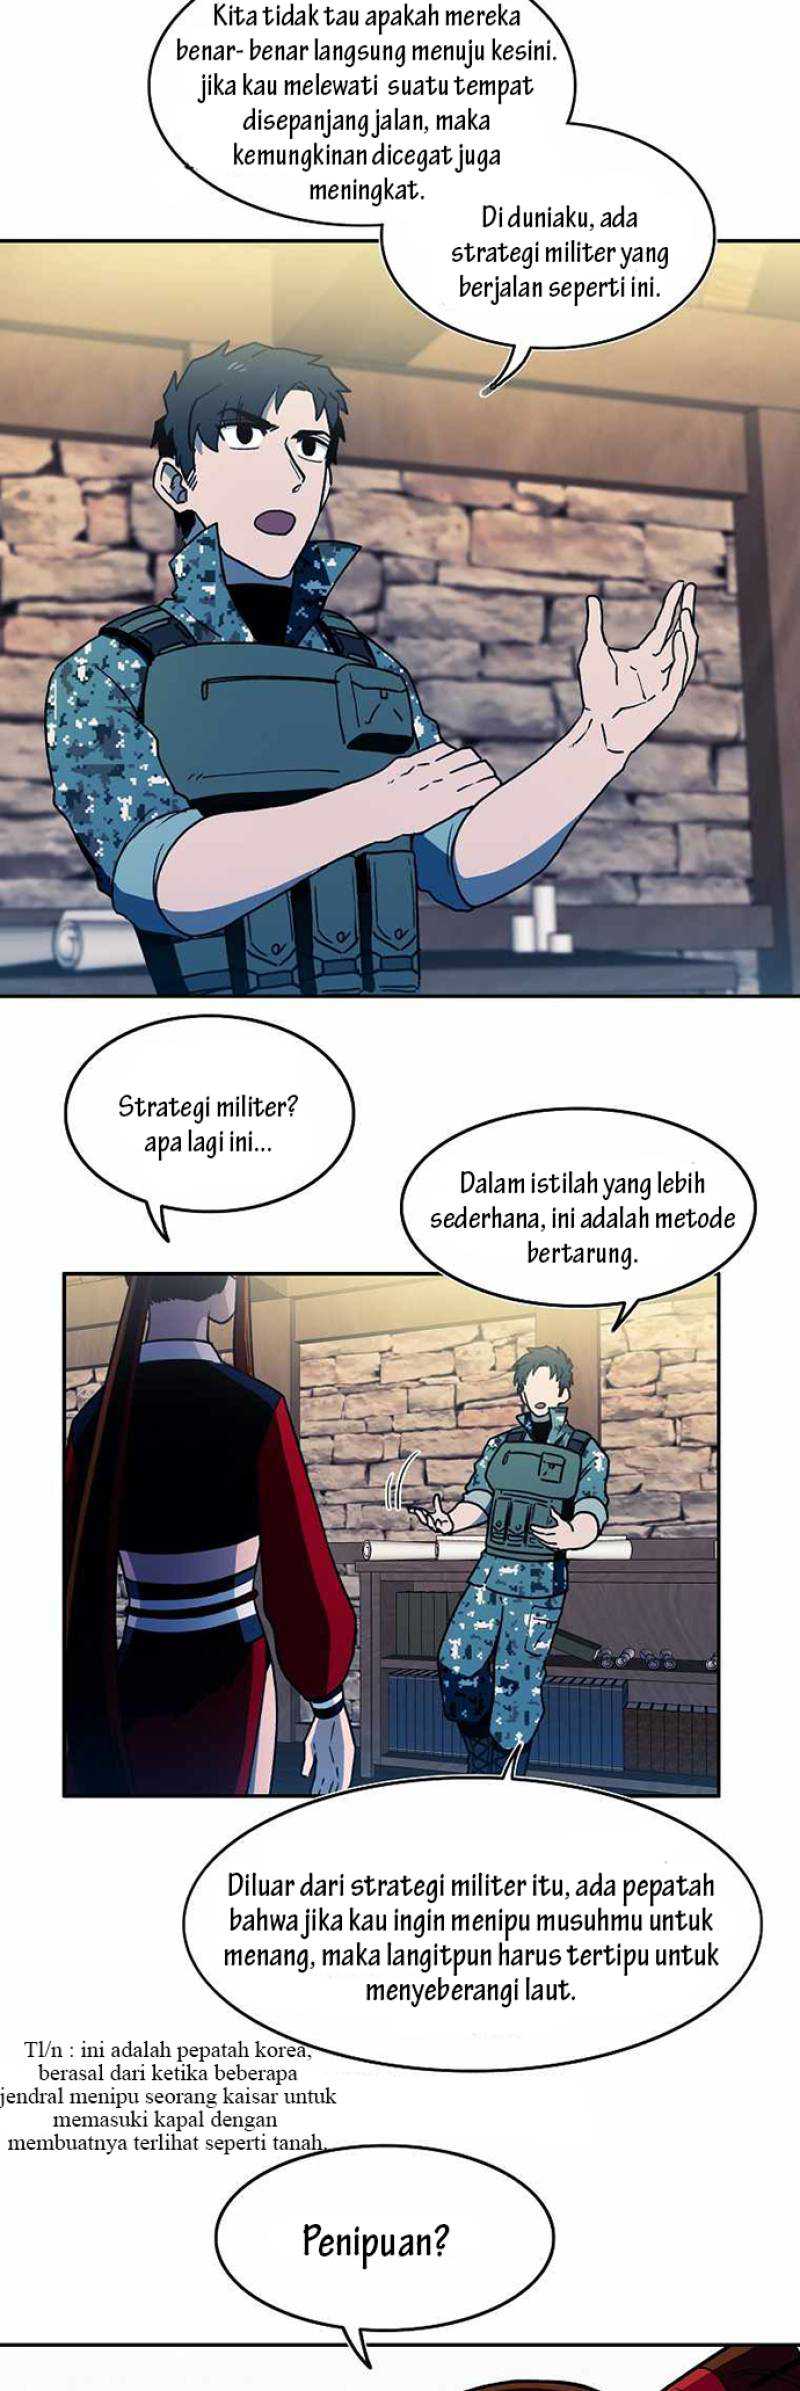 Magical Shooting : Sniper of Steel Chapter 18